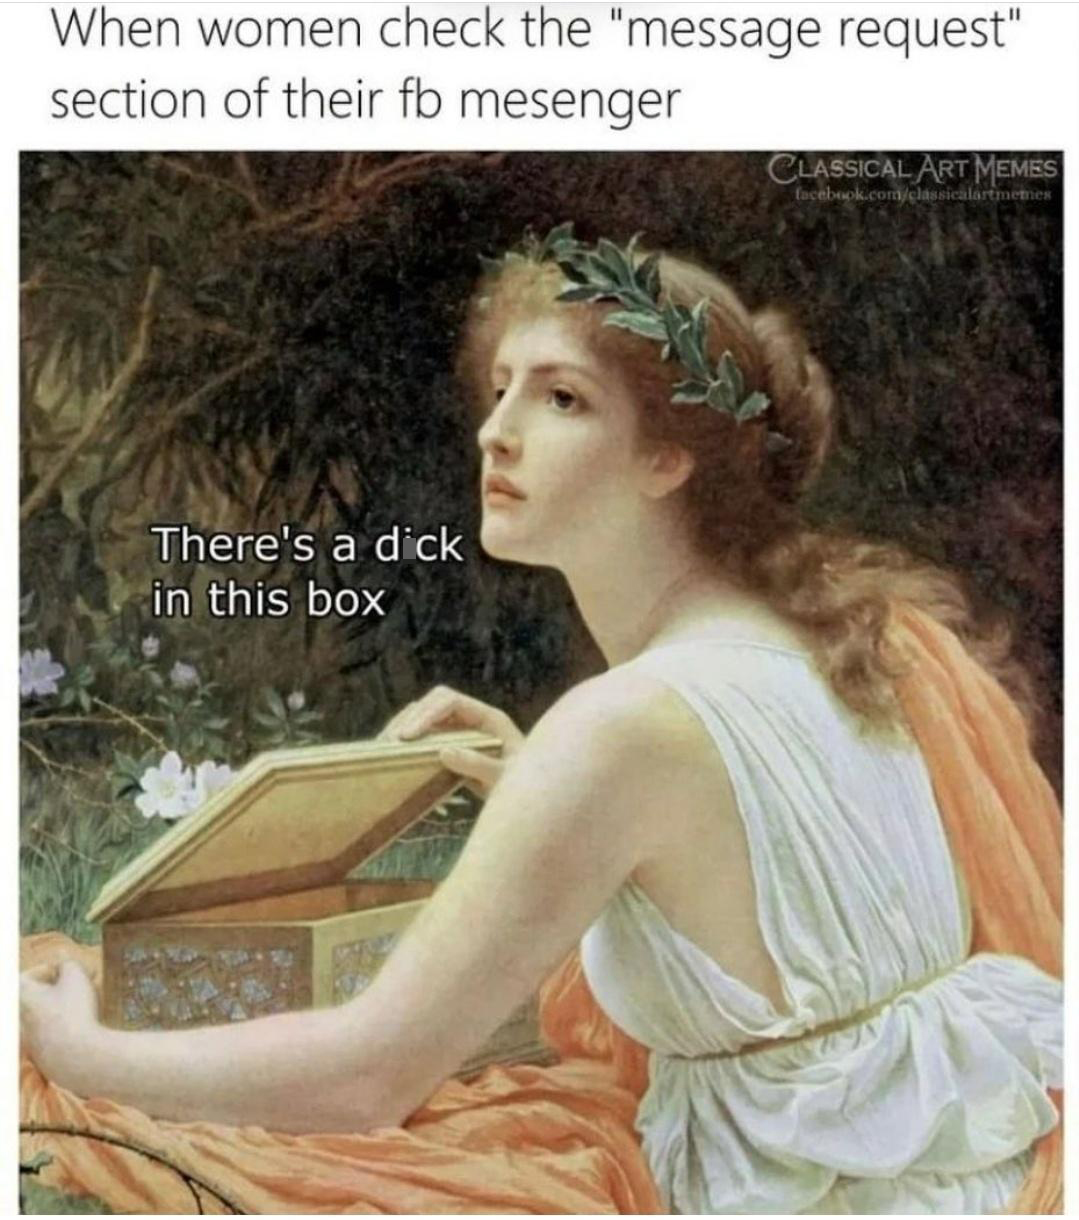 funny memes - charles edward perugini pandora - When women check the "message request" section of their fb mesenger Classical Art Memes komicielirb There's a dick in this box